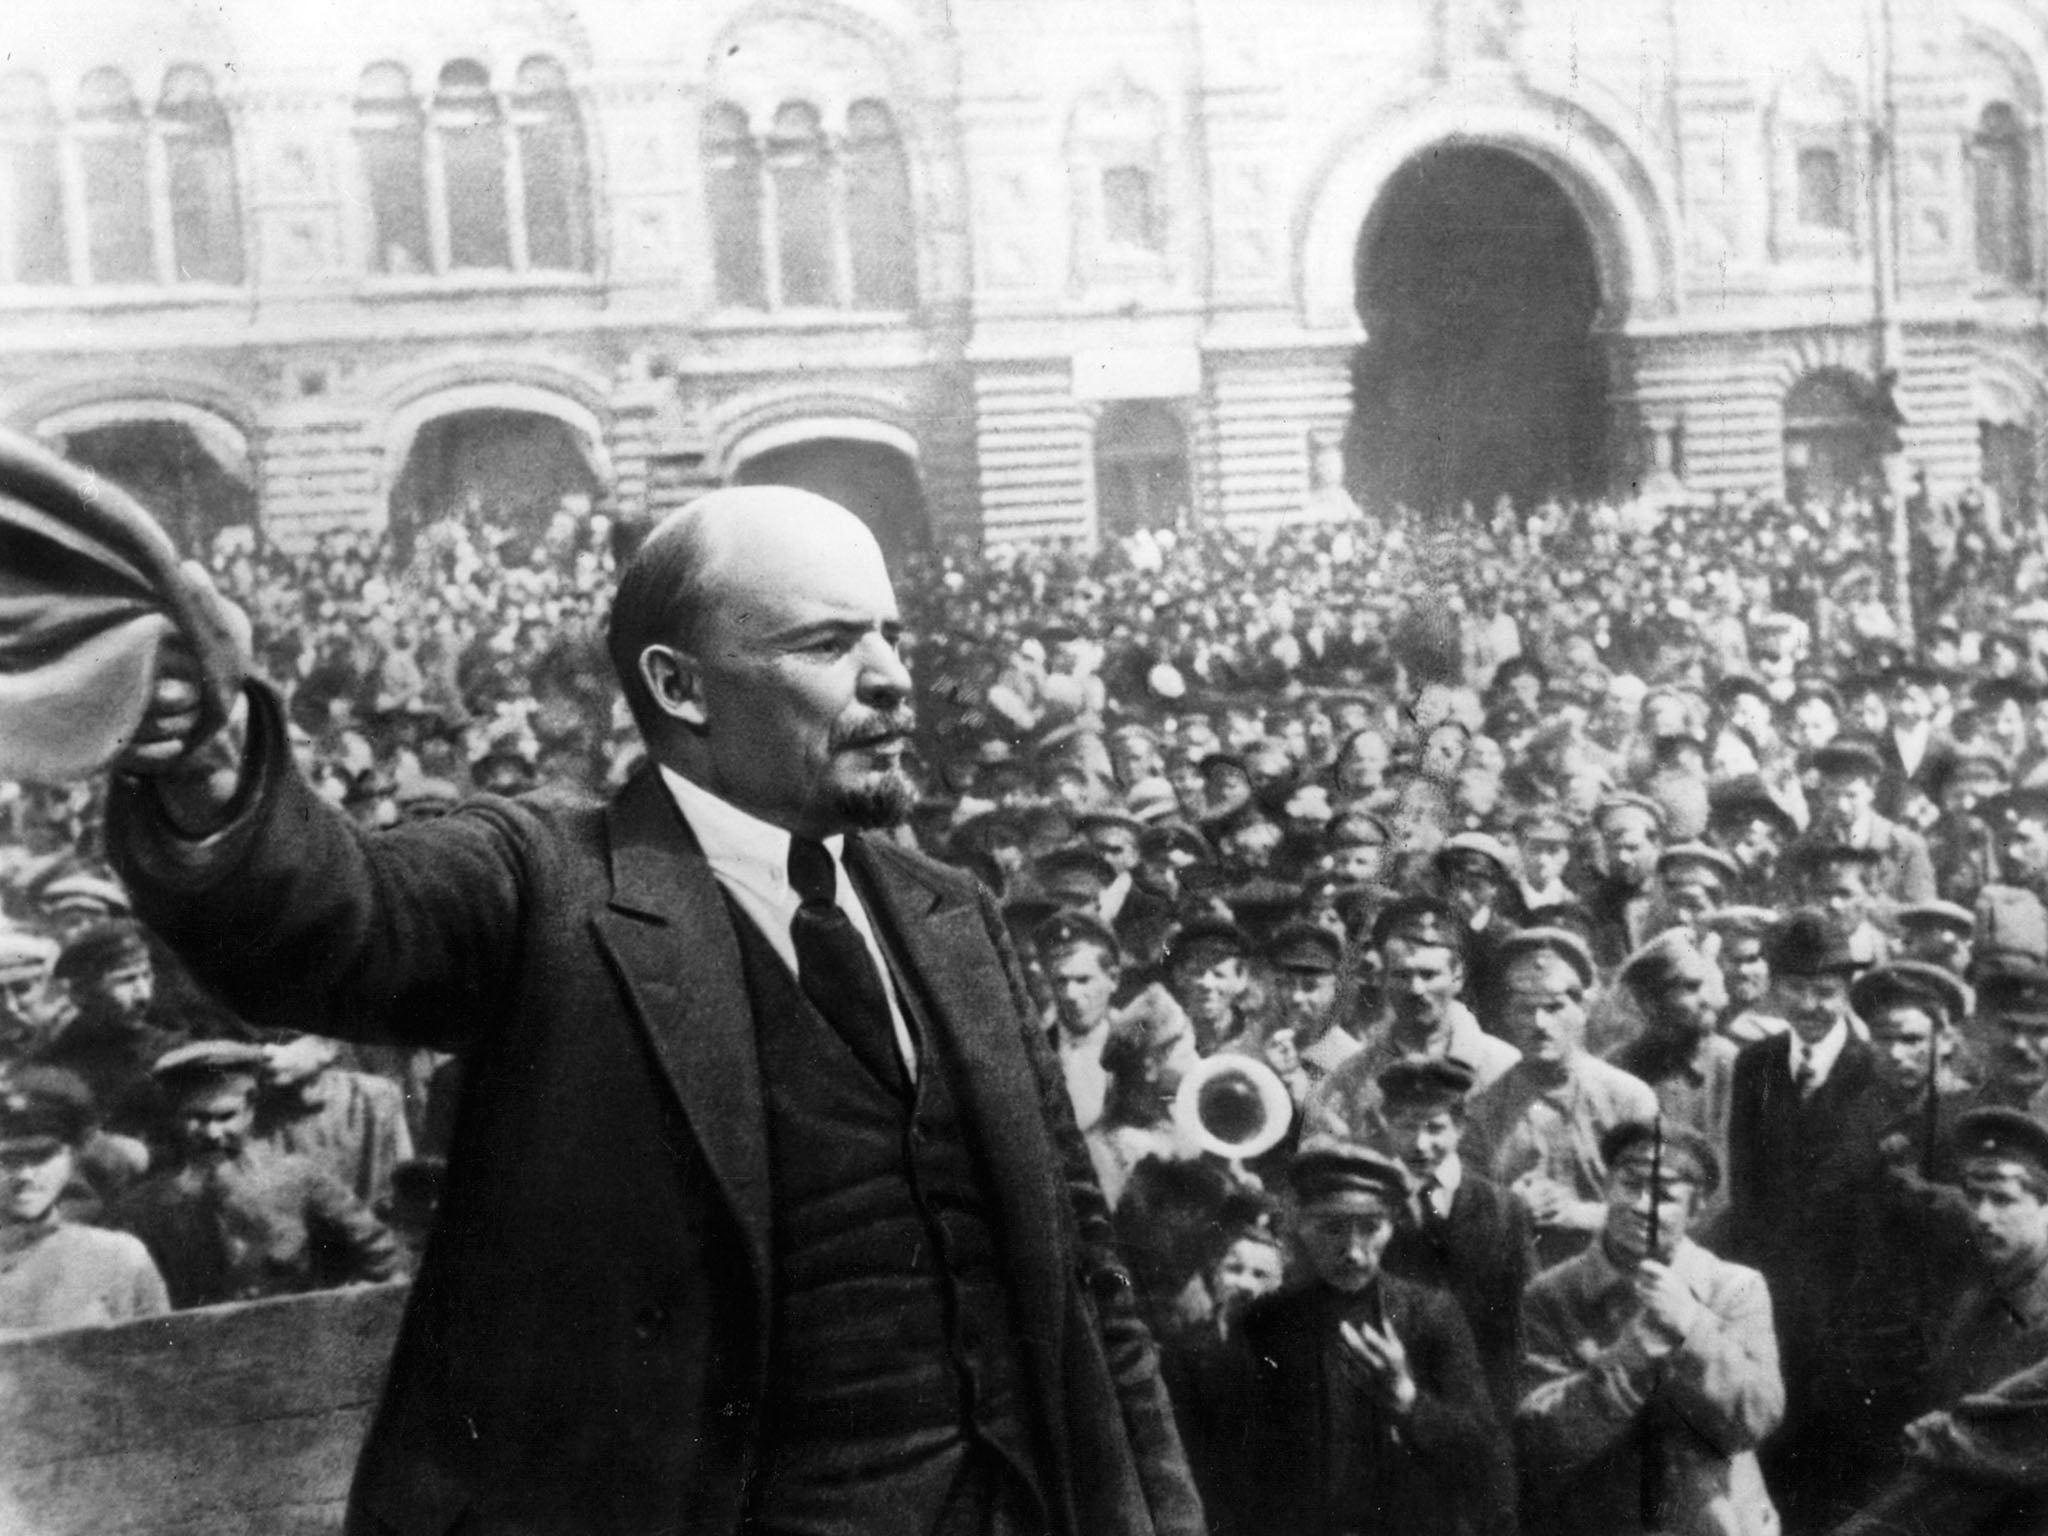 Lenin gives a speech to servicemen on the first anniversary of the foundation of the Soviet armed forces in 1919